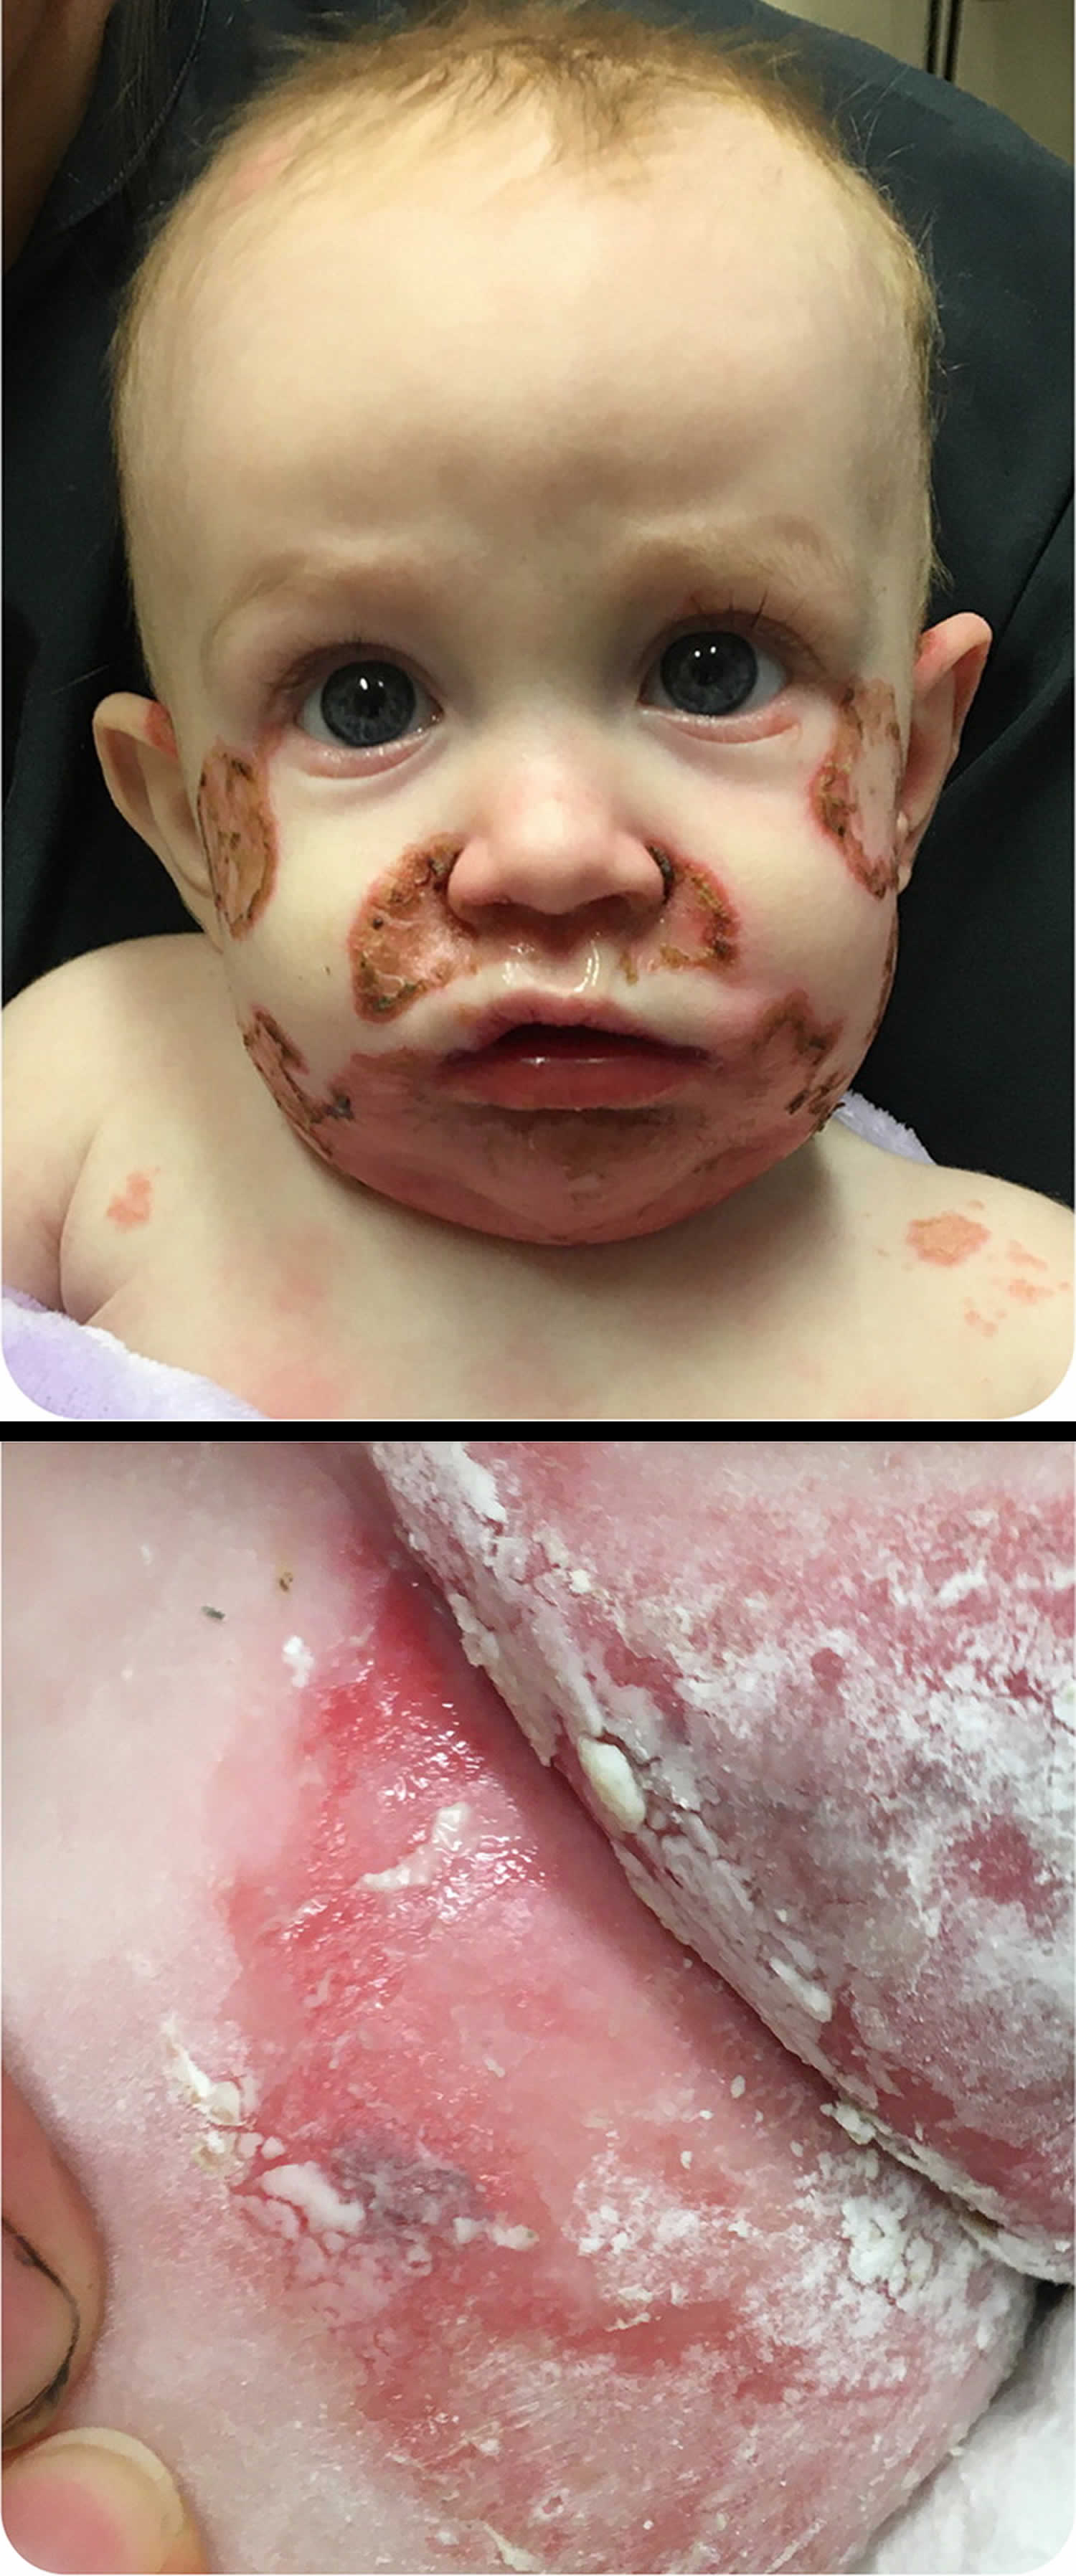 Zinc deficiency in a 5 month old baby